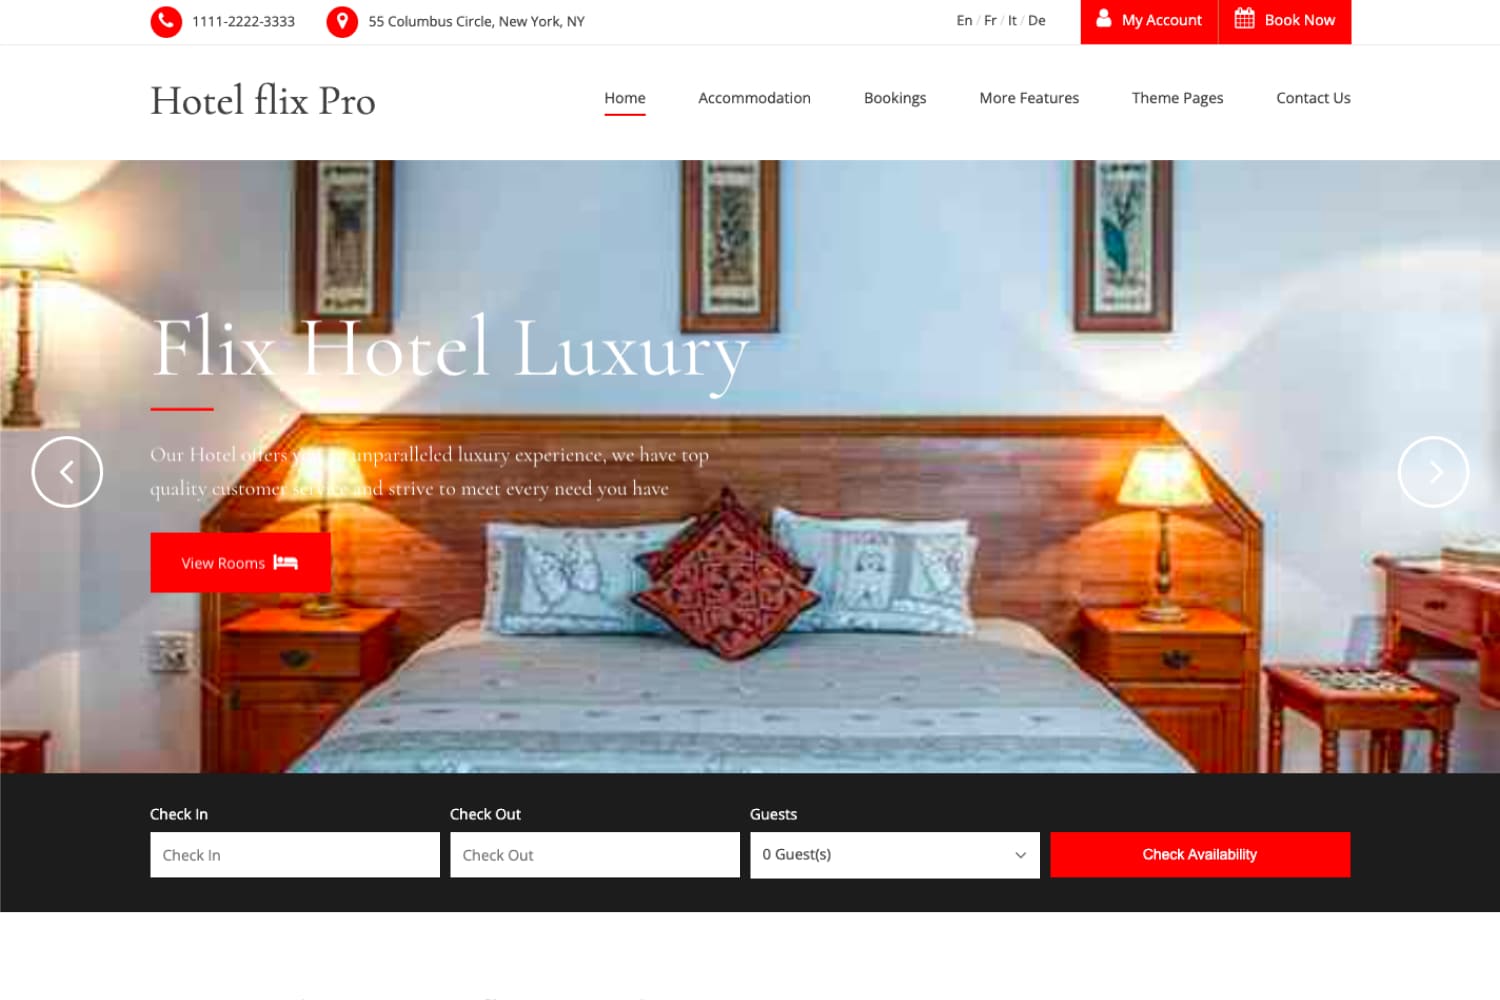 Home page of the hotel website with a photo of the bed in the room and a block for booking.